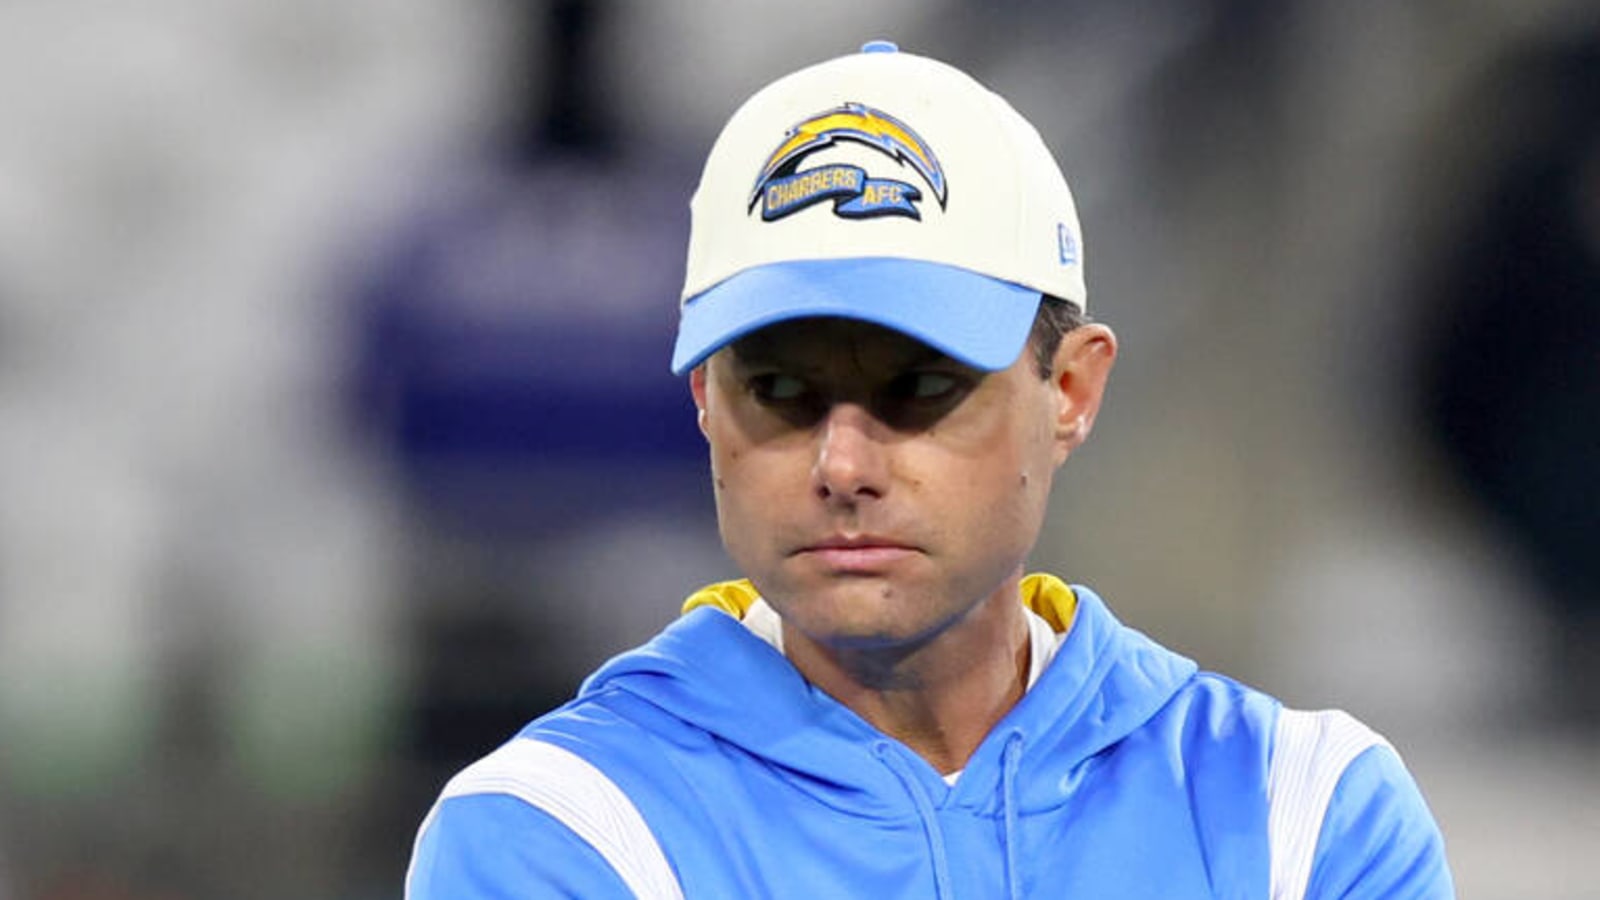 Old Staley quote goes viral after Chargers' collapse